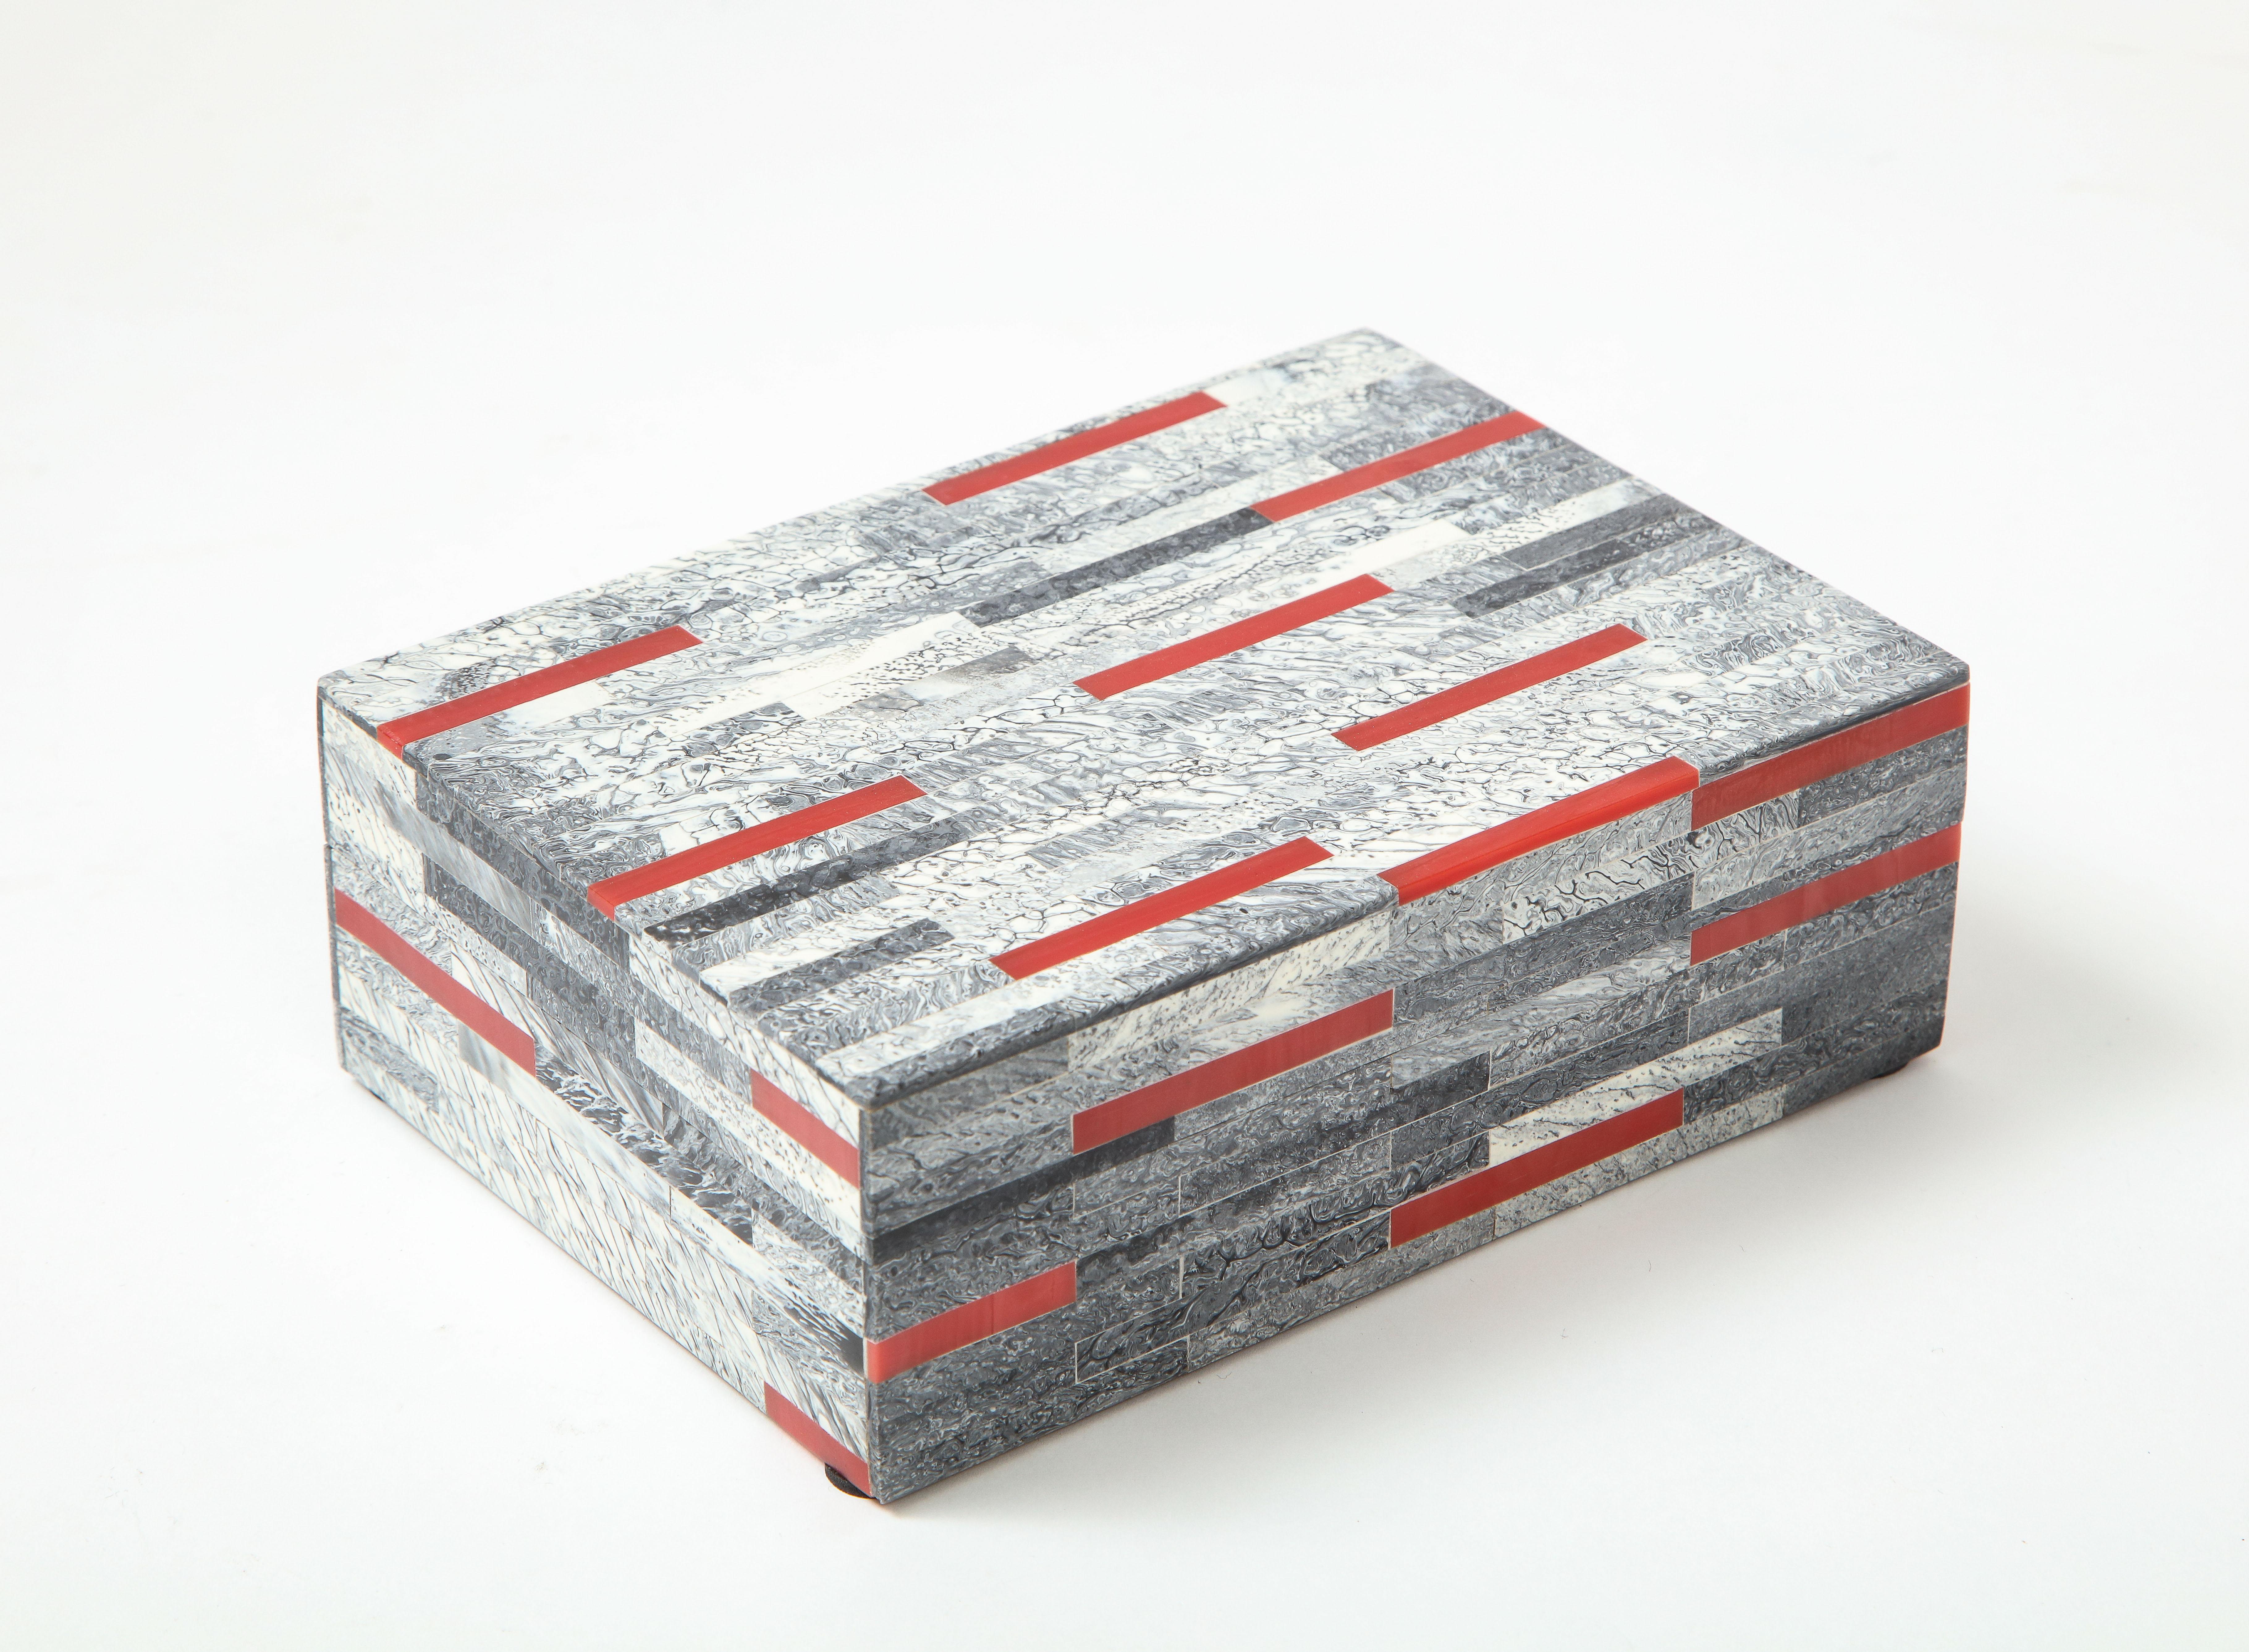 Hand Crafted keepsake/desk box featuring hand cut and polished grey and red bone tiles over a wood box.